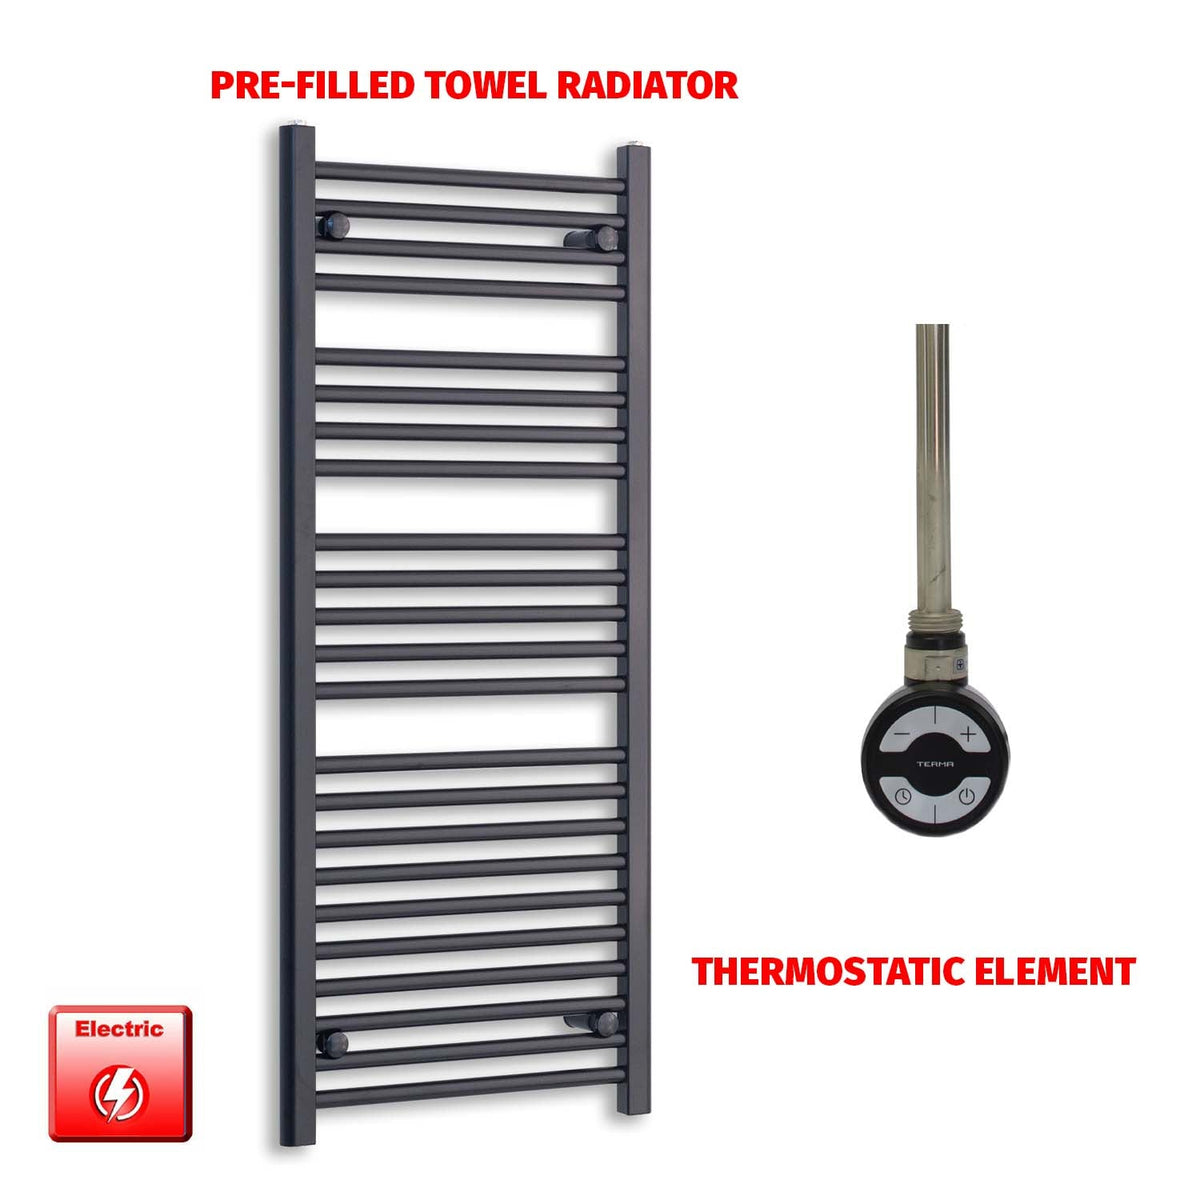 1200 x 600 Flat Black Pre-Filled Electric Heated Towel Radiator HTR moa no timer